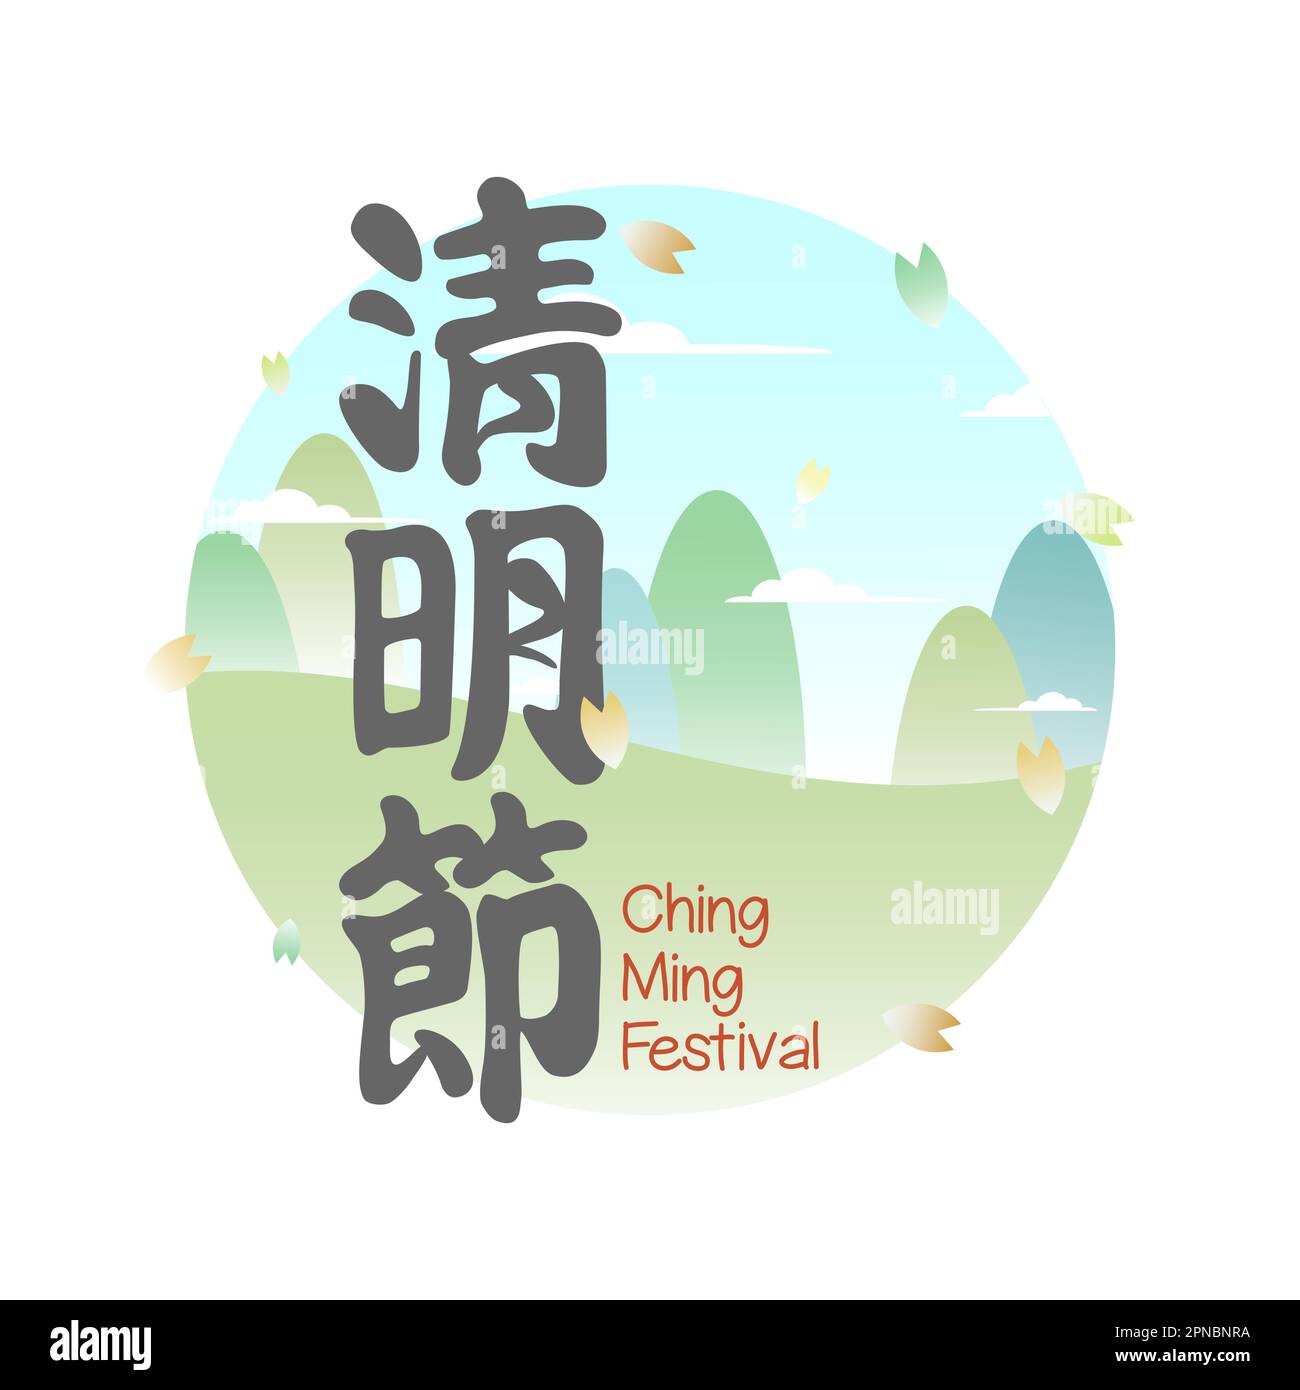 Ching Ming Festival Remembering The Deceased Stock Vector